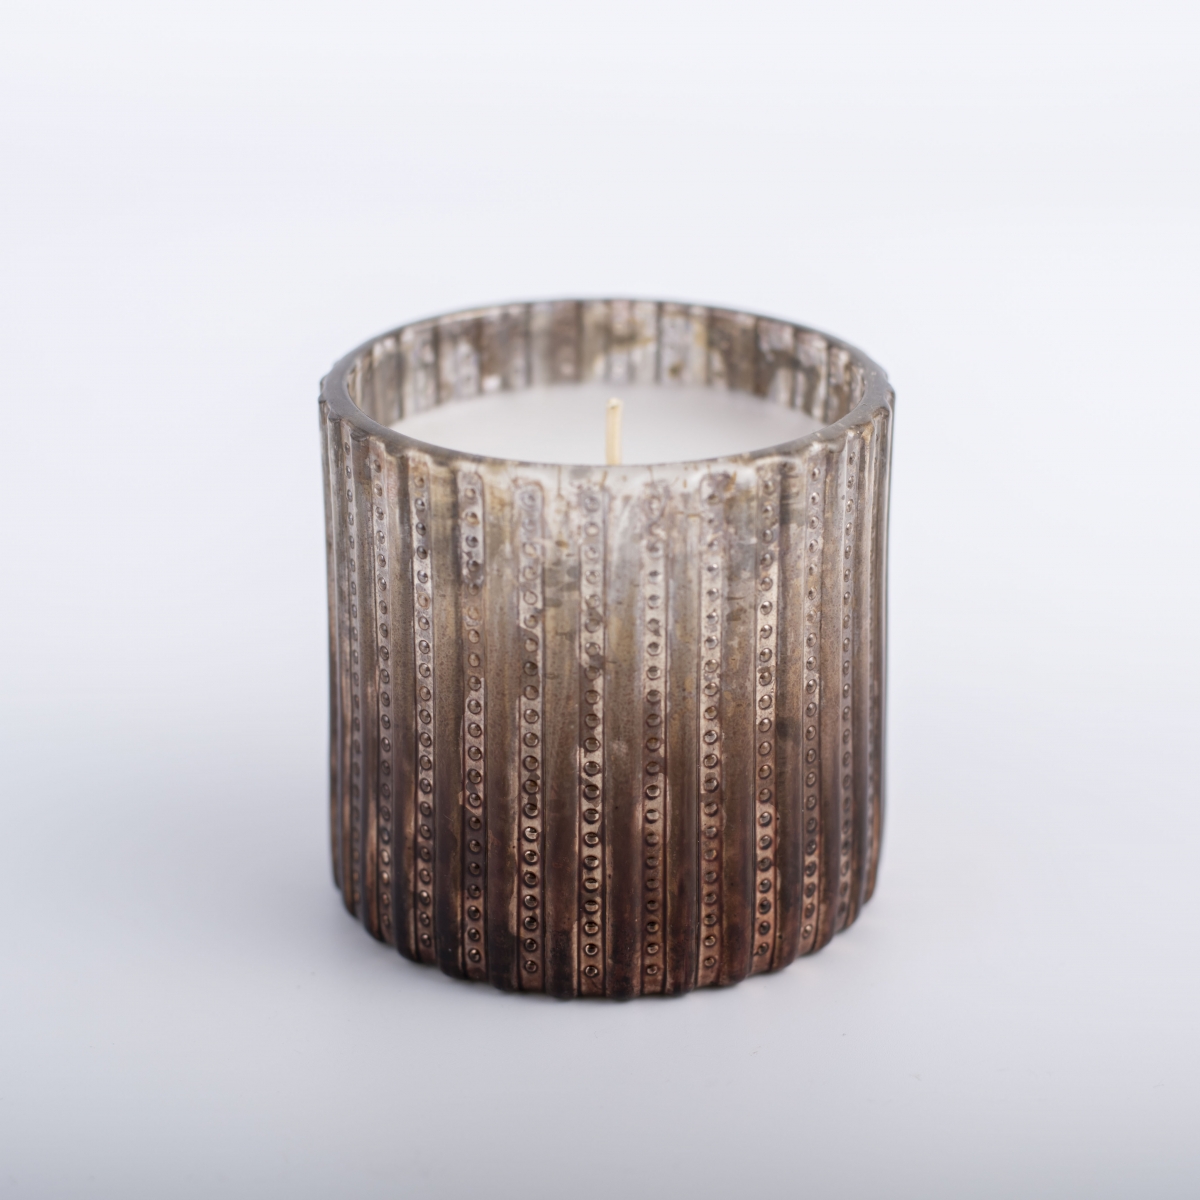 Aromatherapy Candles -Retro Candles ,Engraved Dot Stripe Candle Jar ,Vegan Candles ,Gradient Brown Glass Jar ,China Factory, Cheap Price-HOWCANDLE-Candles,Scented Candles,Aromatherapy Candles,Soy Candles,Vegan Candles,Jar Candles,Pillar Candles,Candle Gift Sets,Essential Oils,Reed Diffuser,Candle Holder,